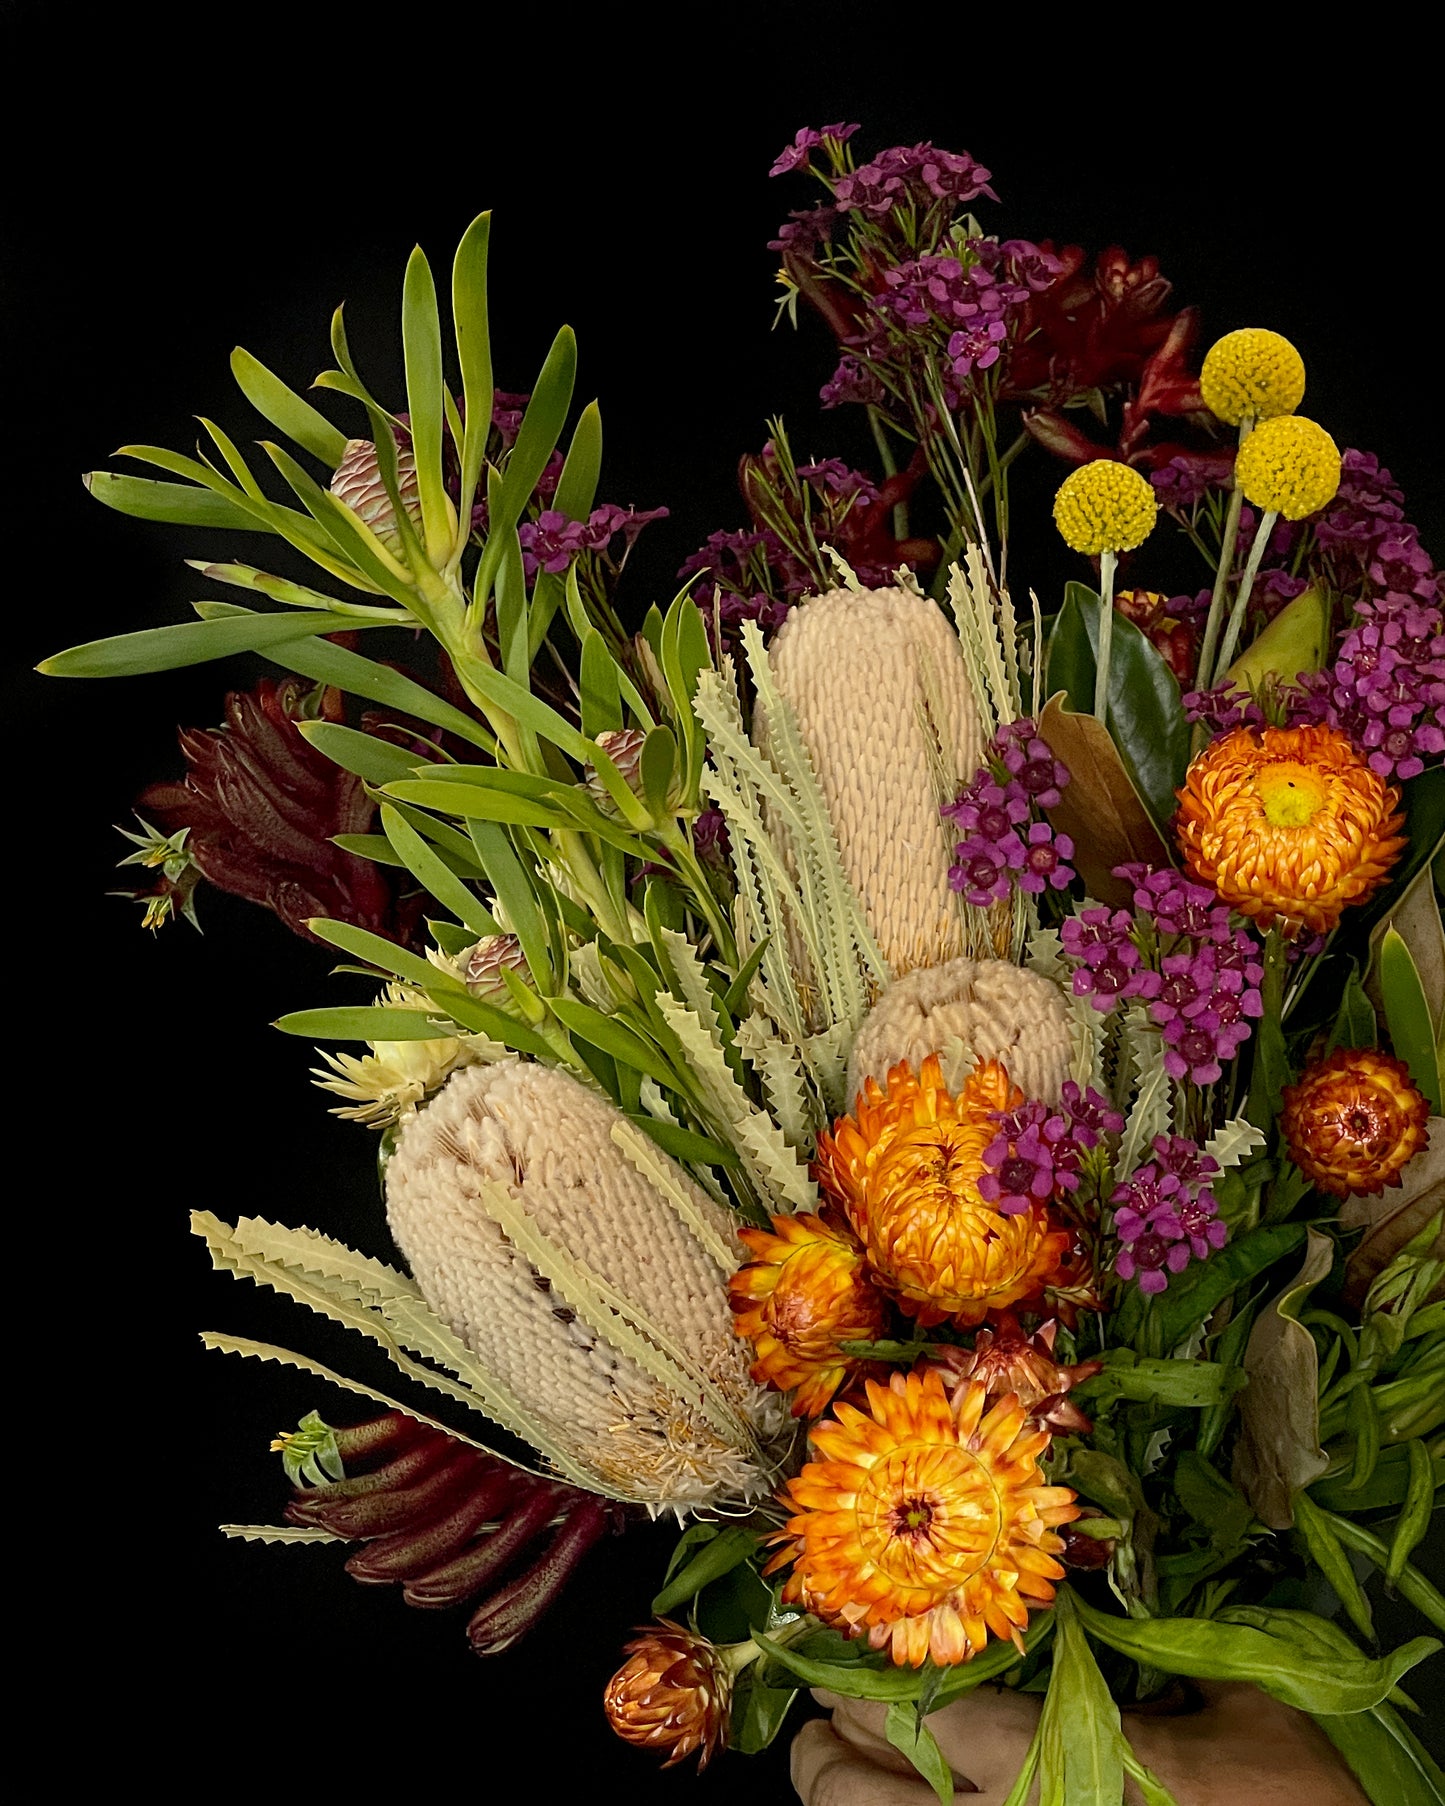 Banksia, Billy Button, Native Flowers